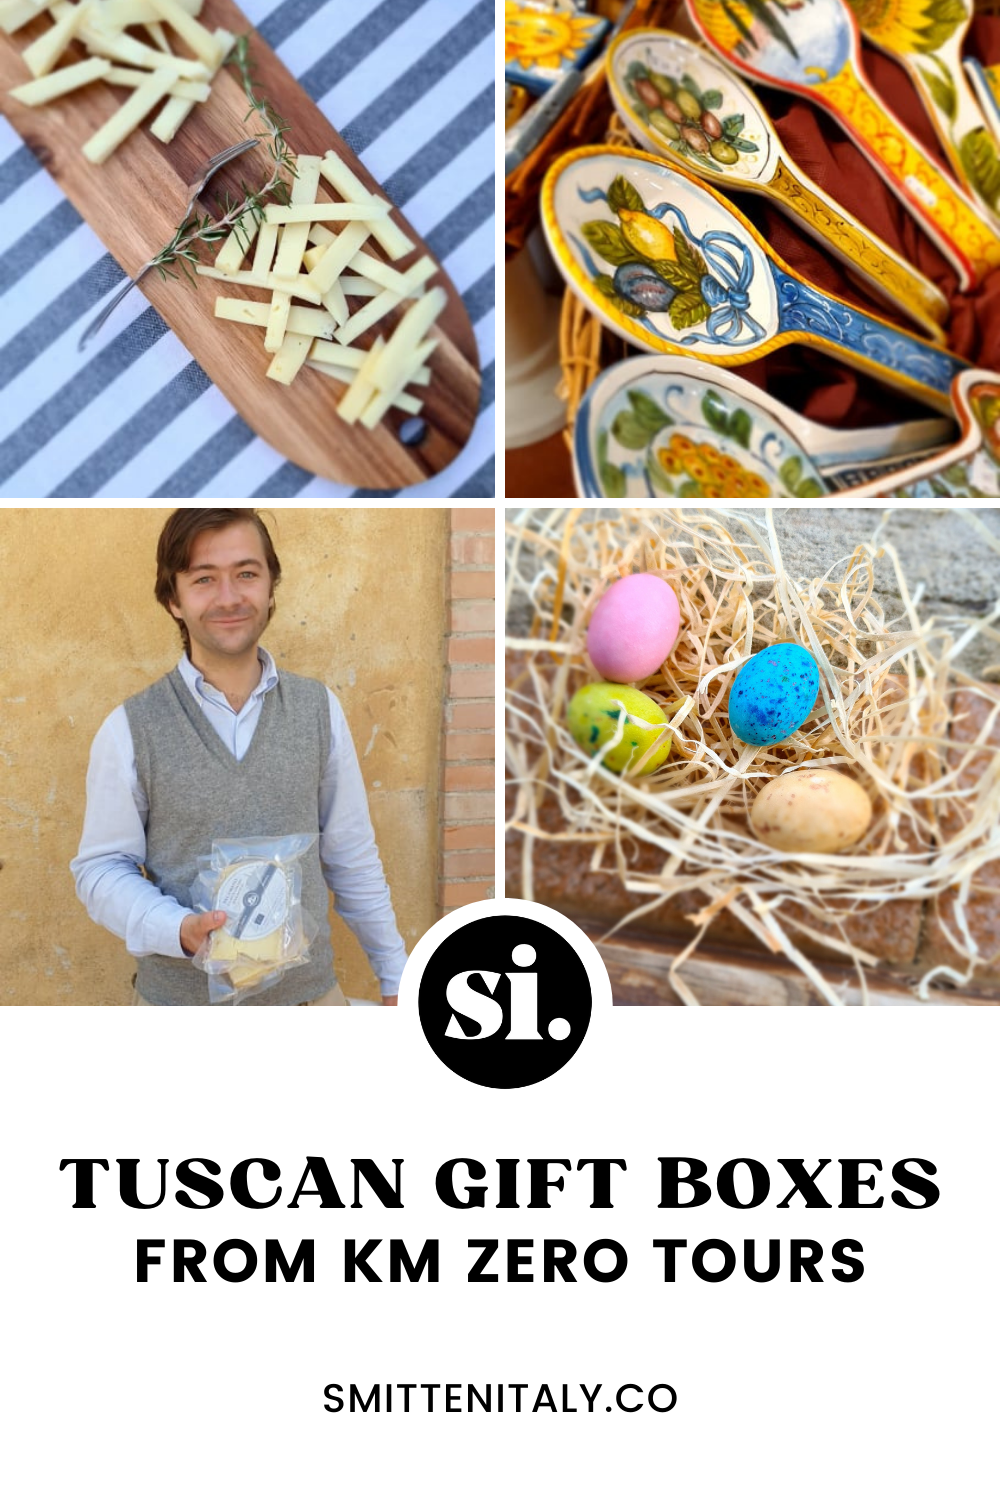 My experience: KM Zero Gourmet Gift Boxes from Tuscany 2